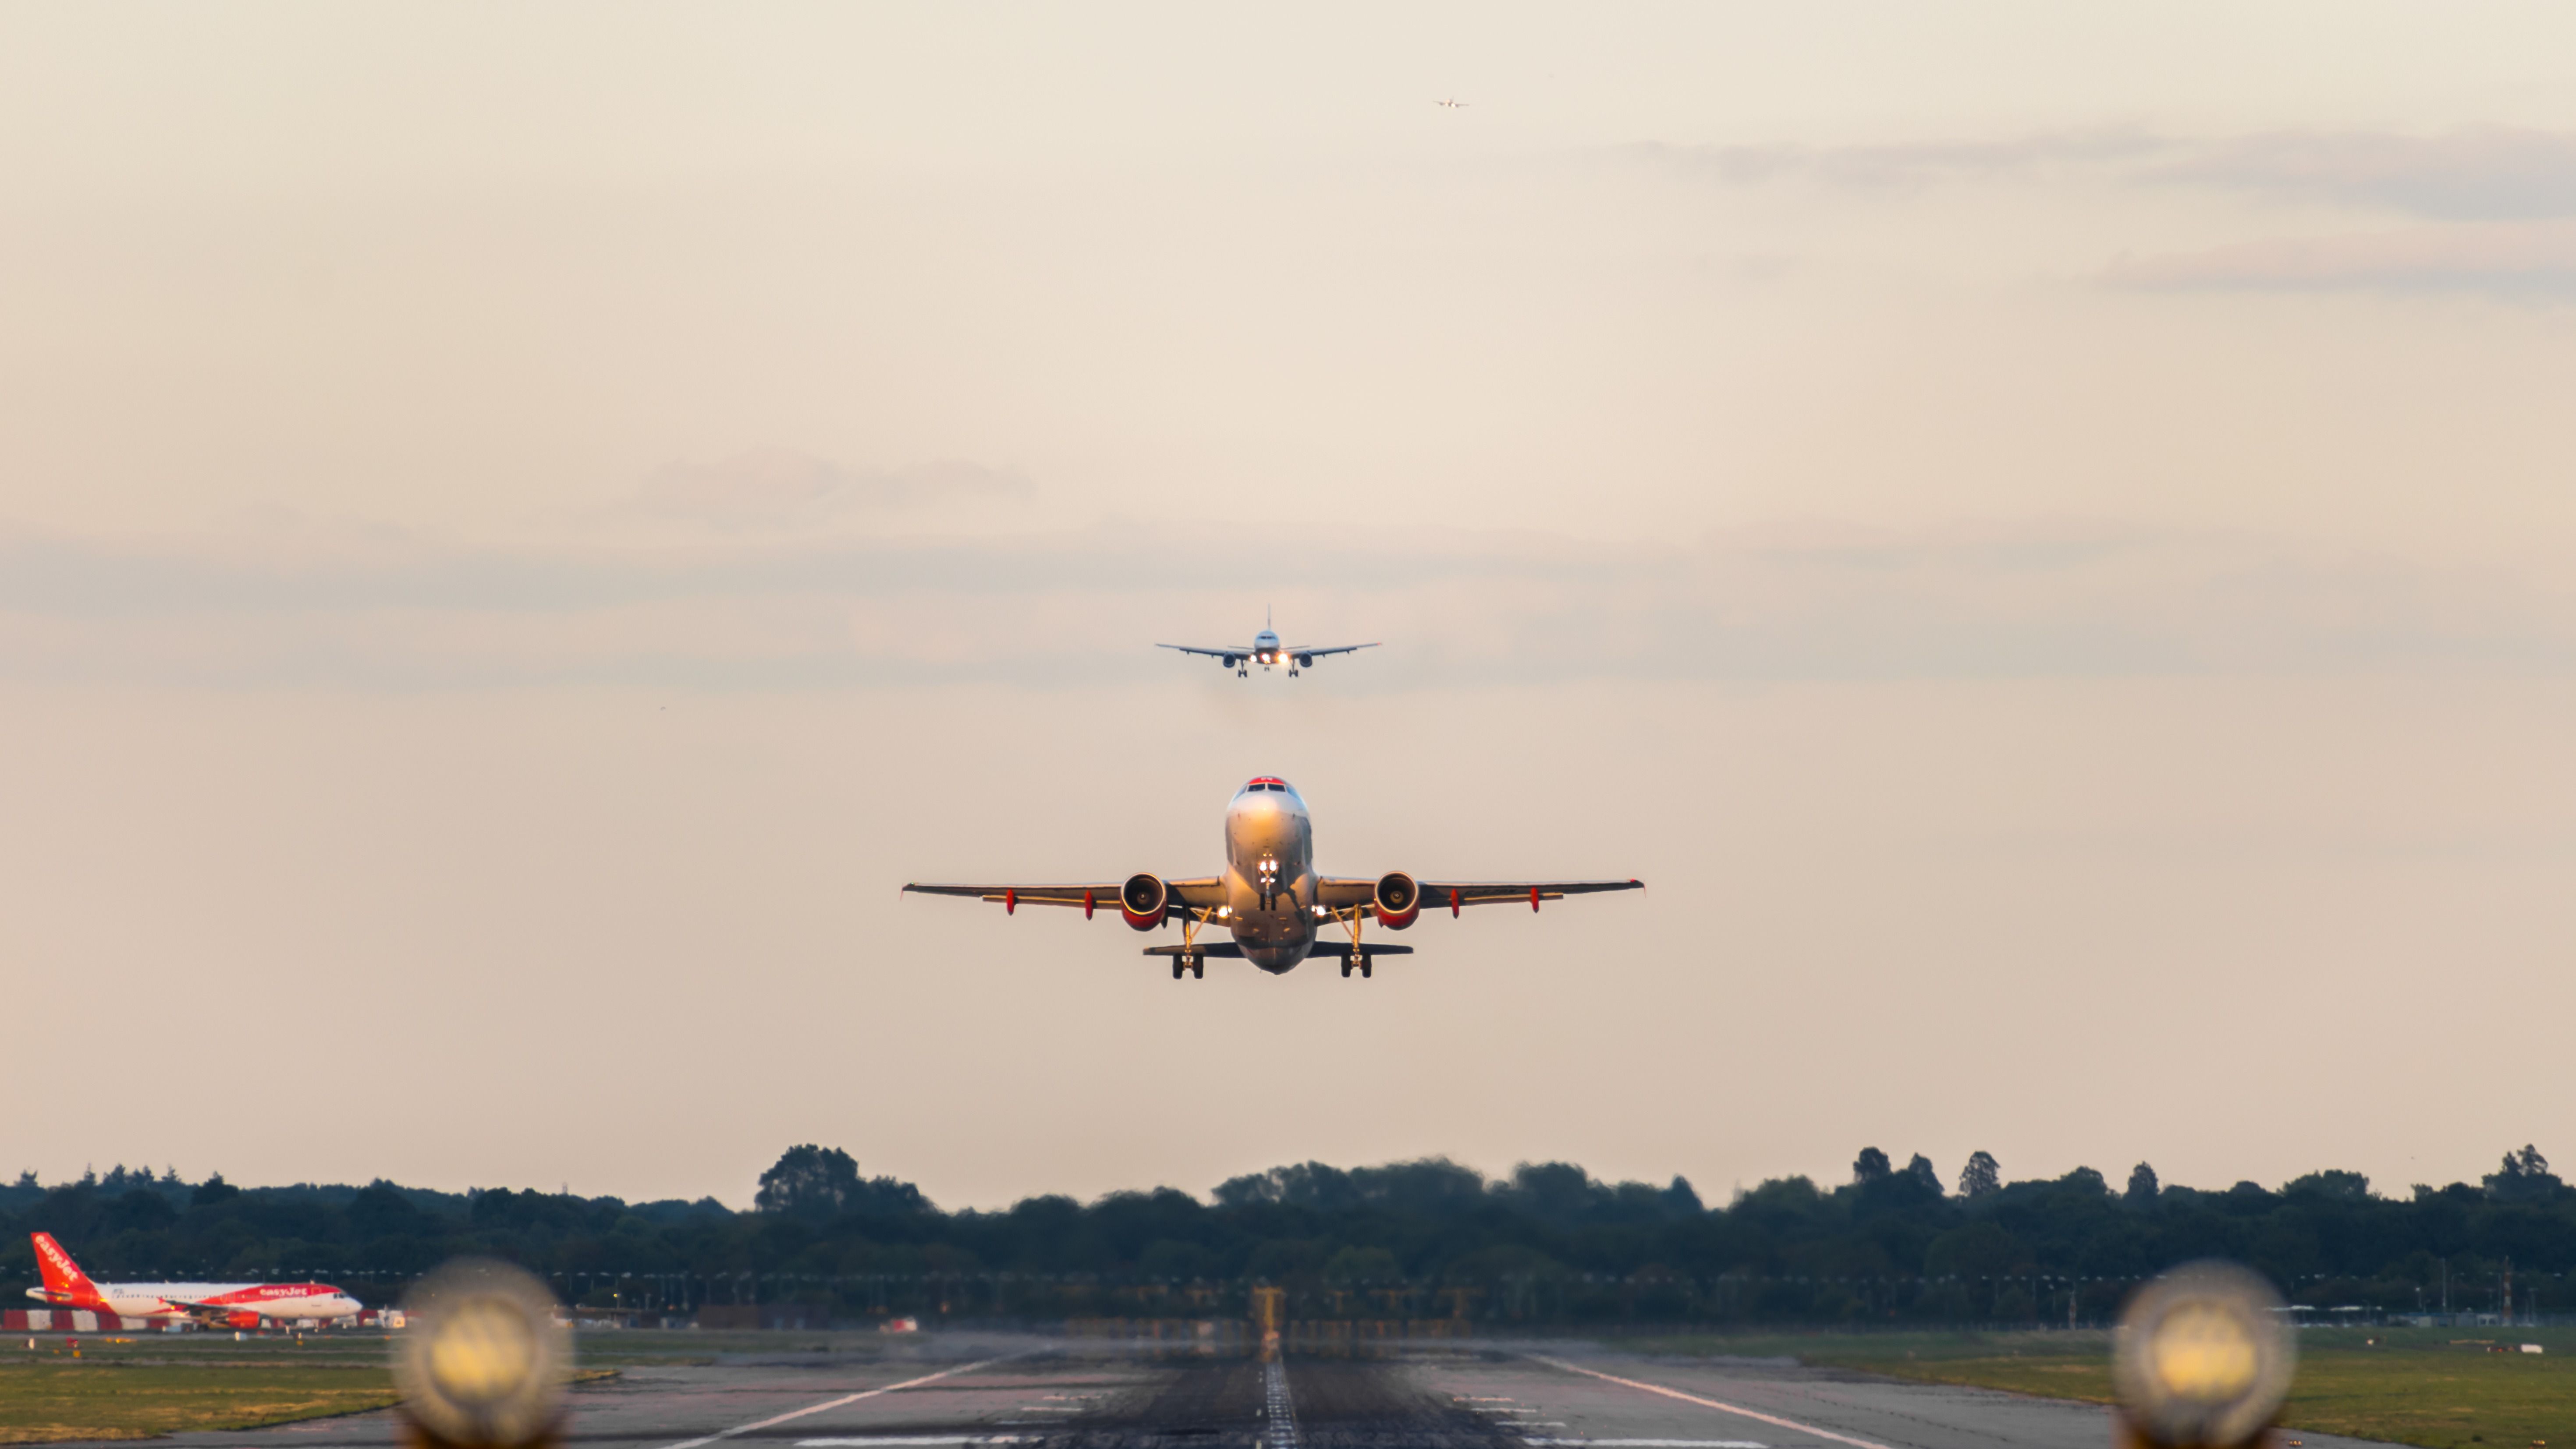 Two aircraft preparing to land at Gatwick Airport